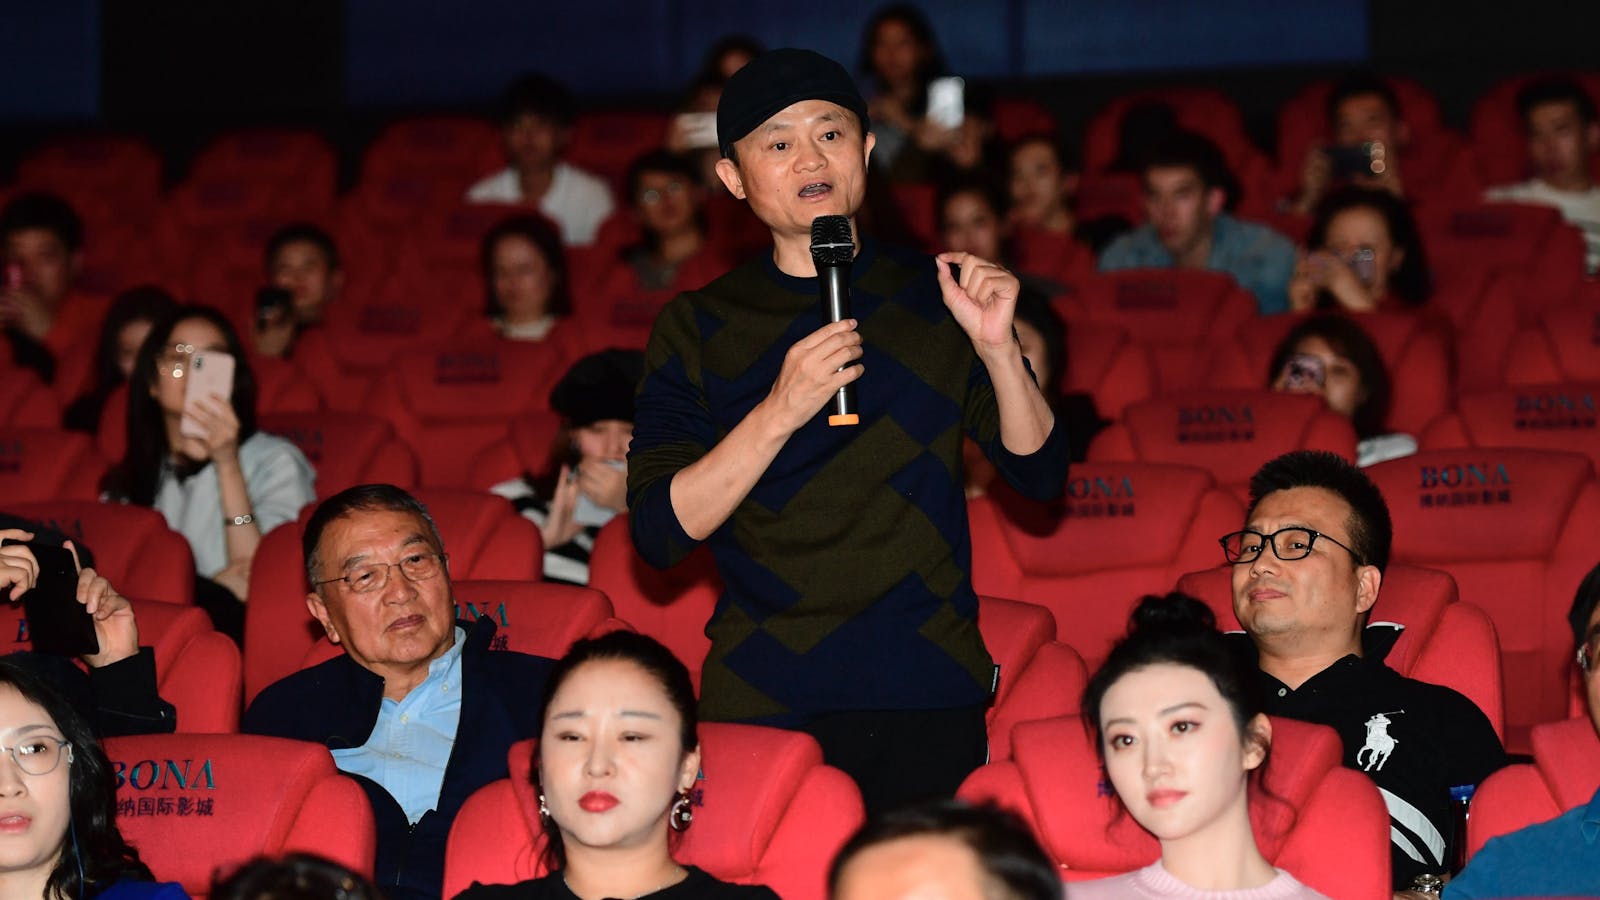 Alibaba Chairman Jack Ma at a promotional event for "Green Book" in Beijing earlier this year. Photo by AP